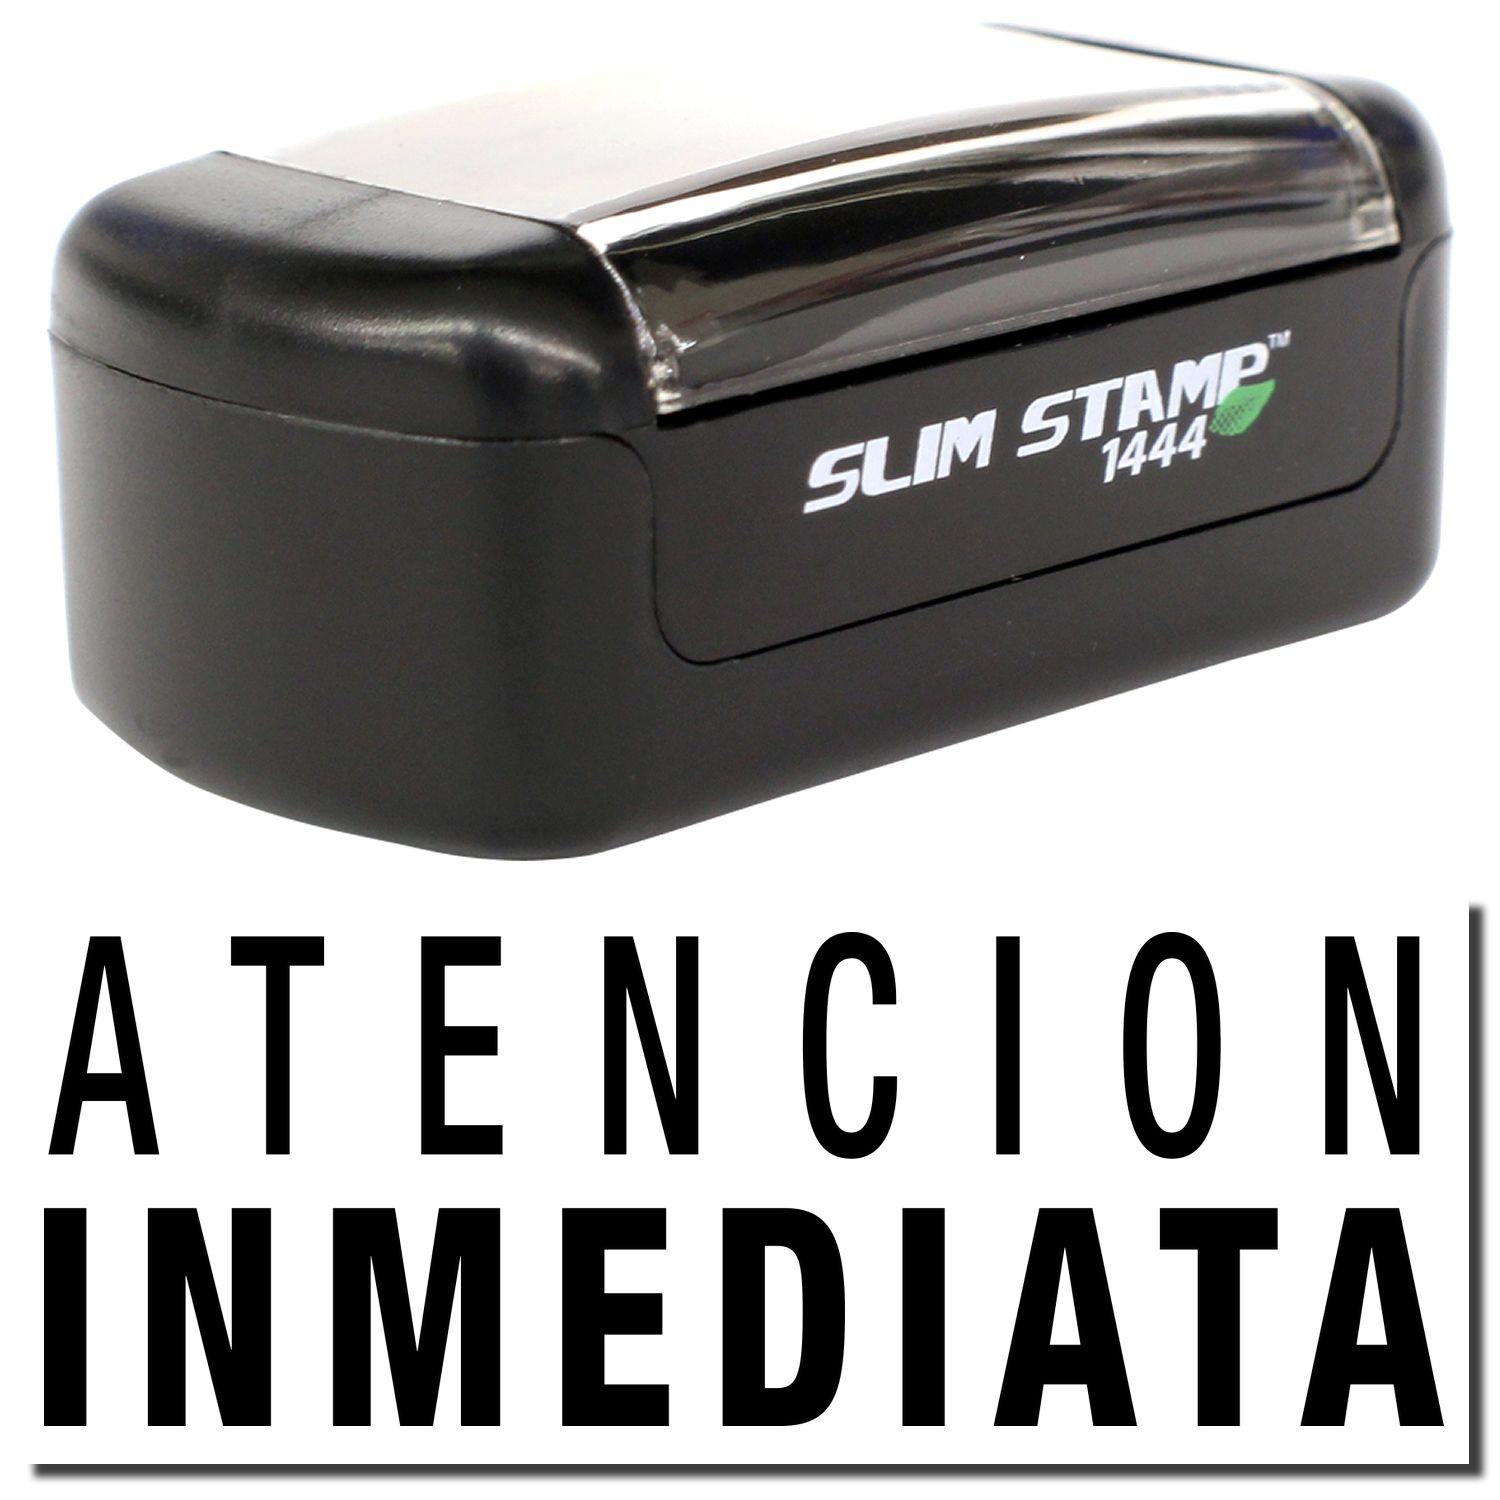 A stock office pre-inked stamp with a stamped image showing how the text "ATENCION INMEDIATA" is displayed after stamping.